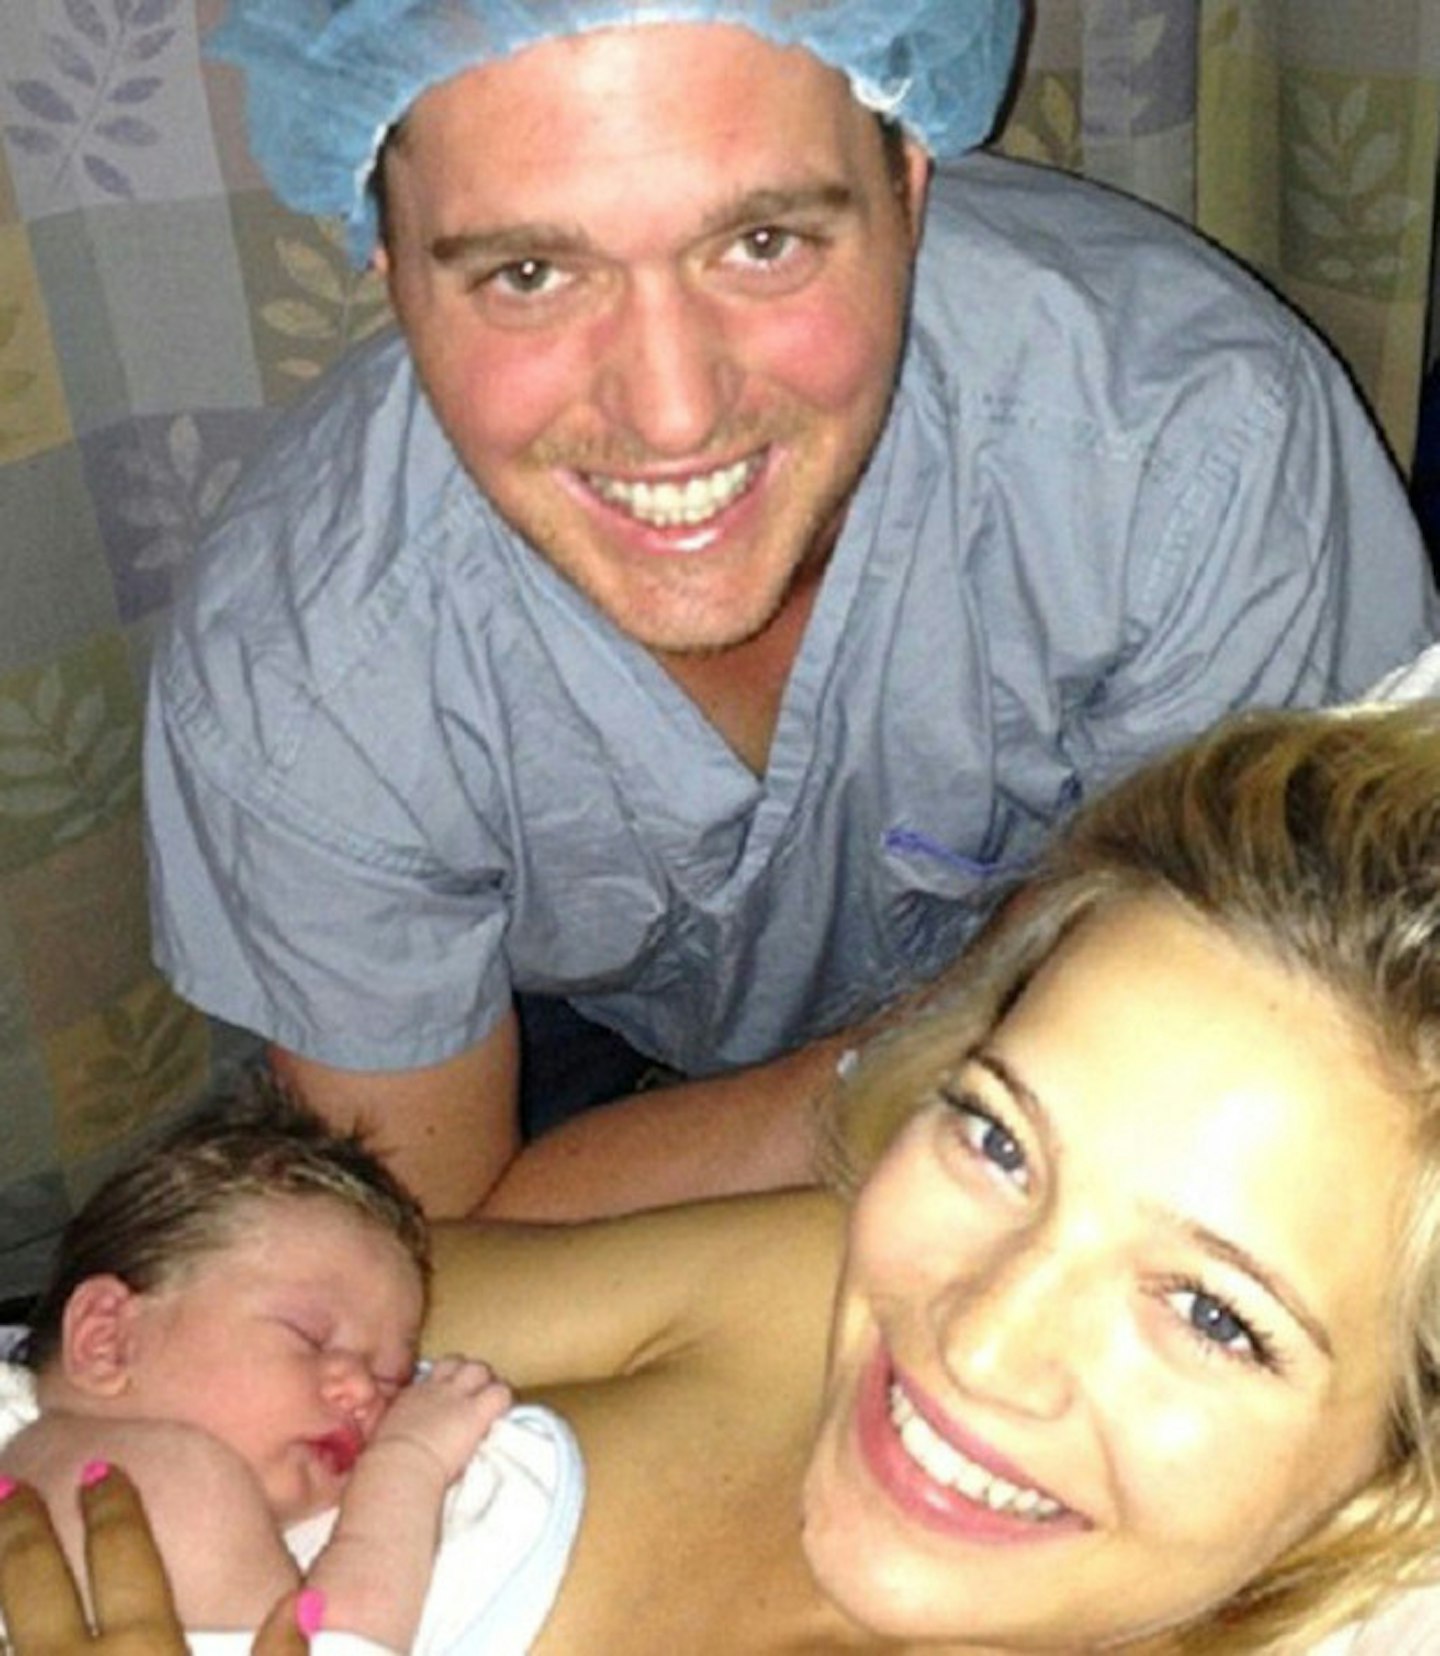 August 2013: Michael Buble and Luisana Lopilato welcomed son Noah